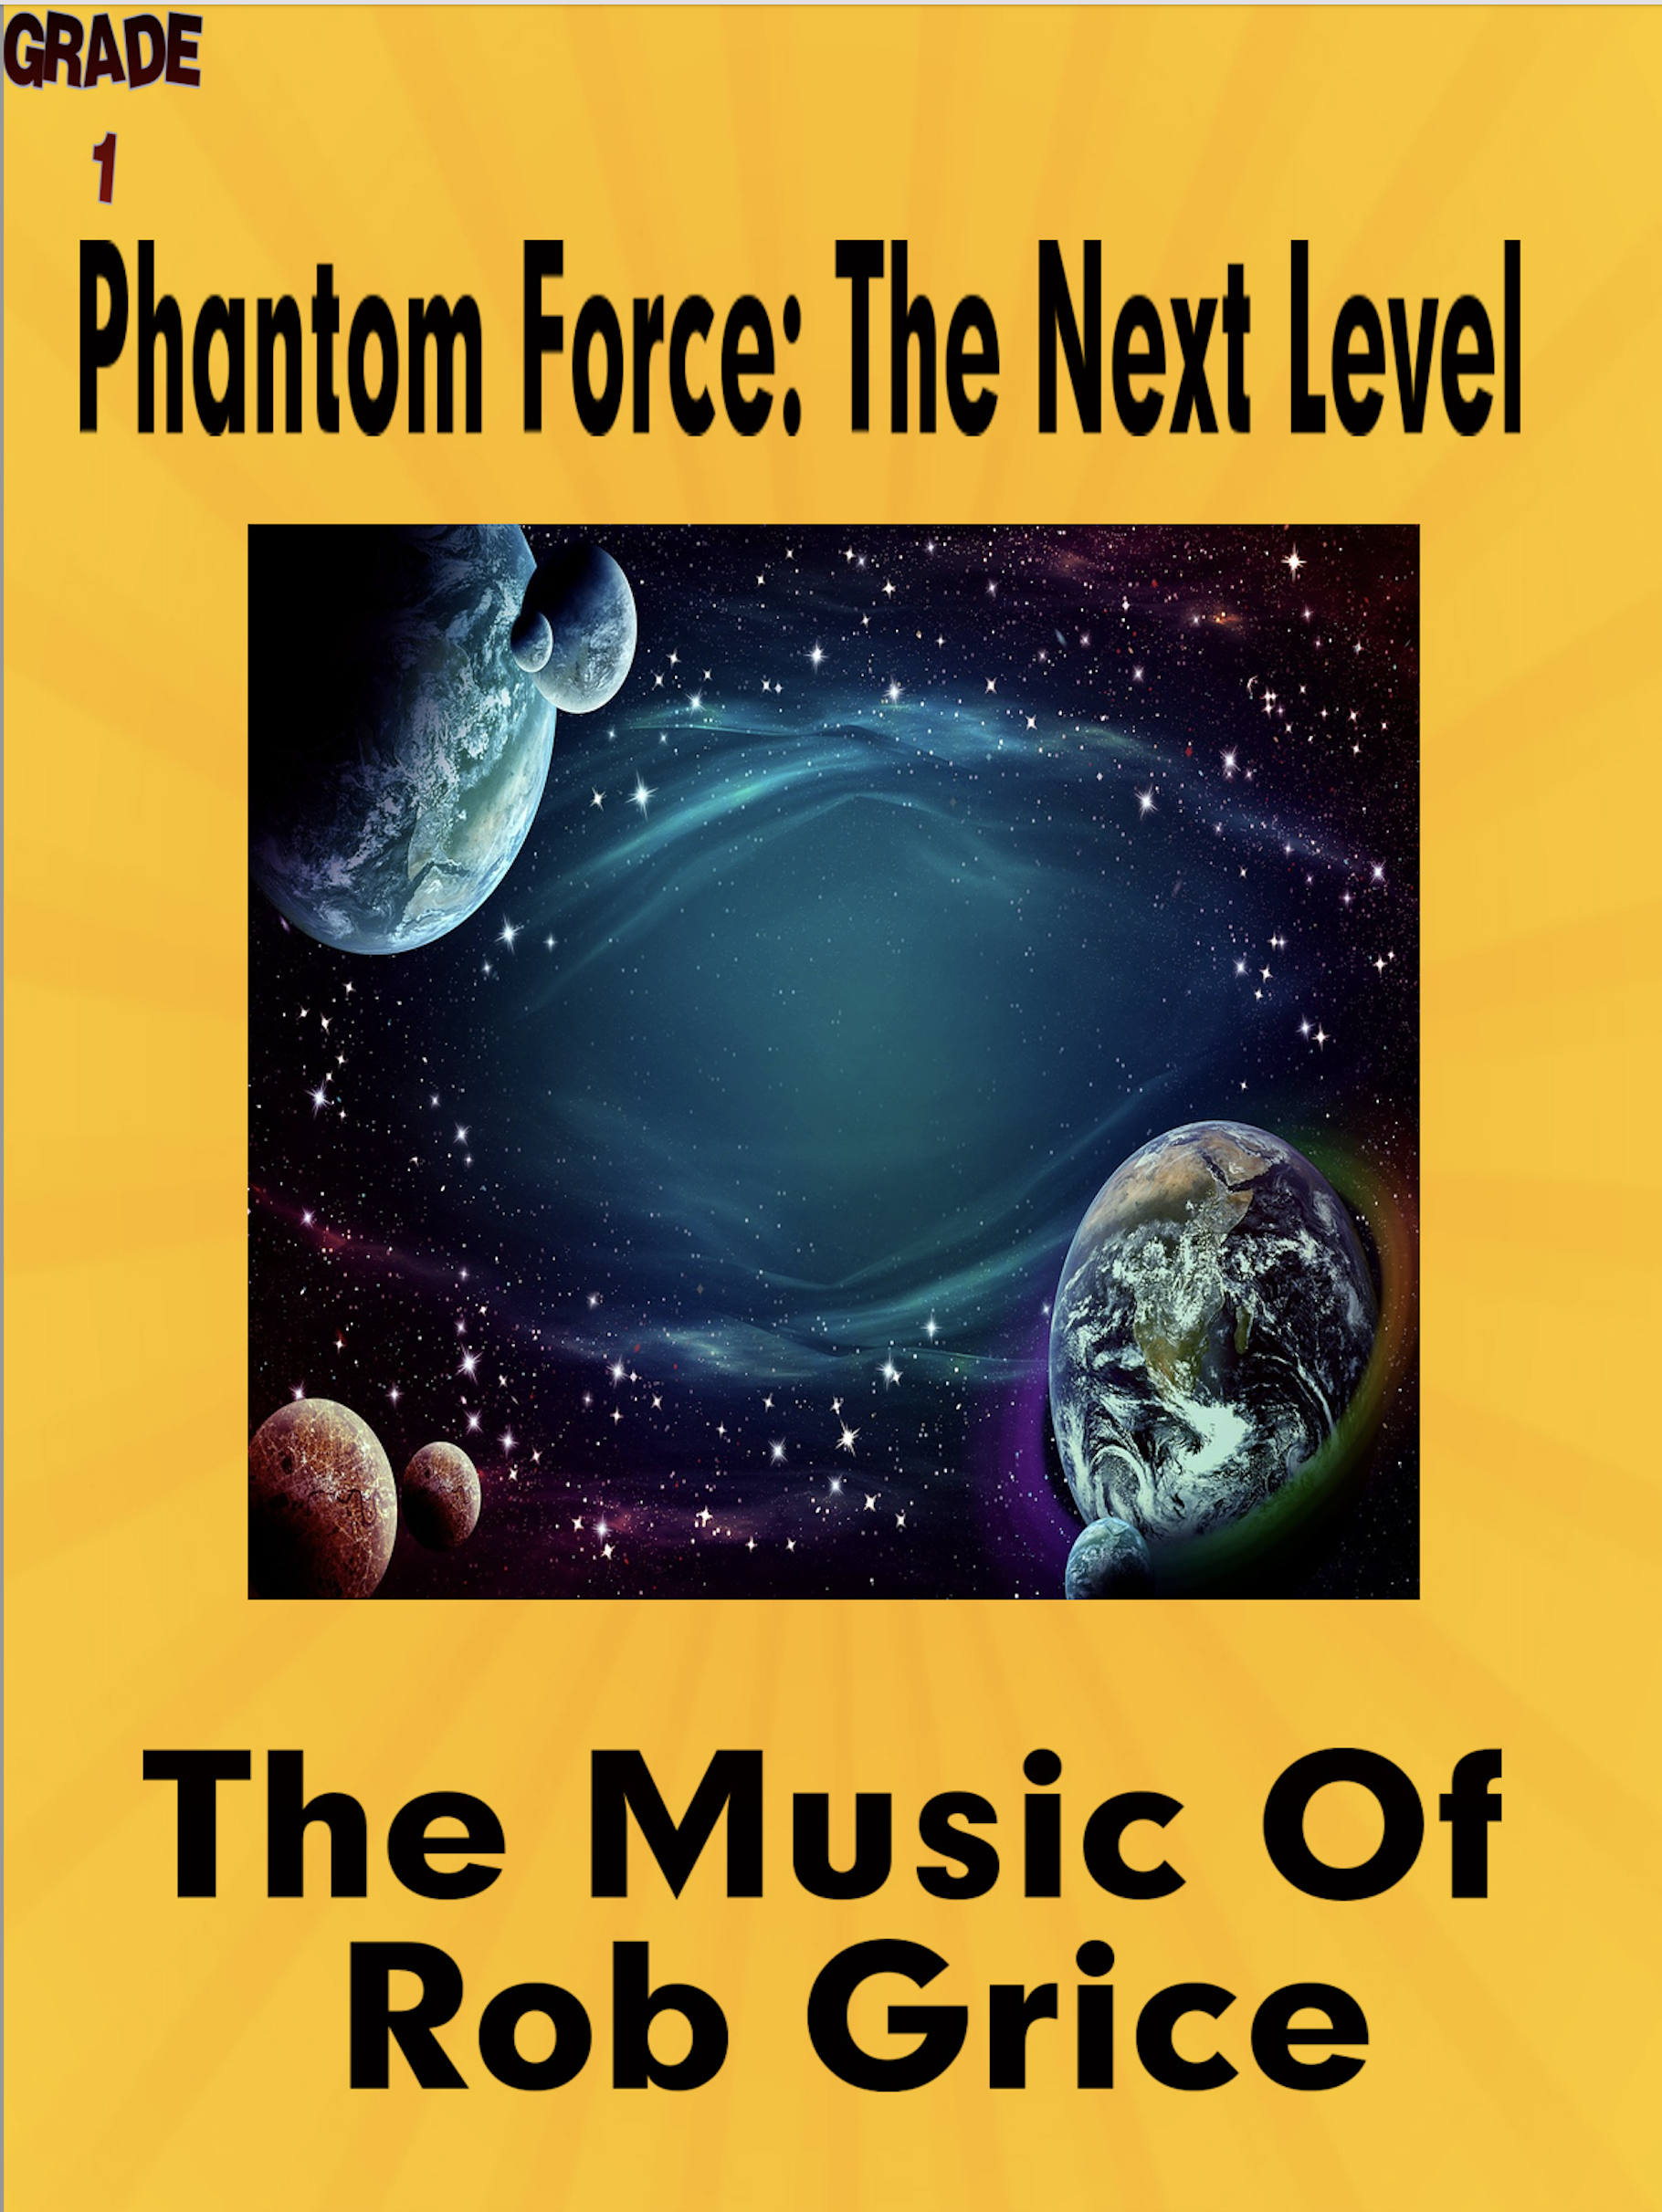 Phantom Force: The Next Level by Rob Grice